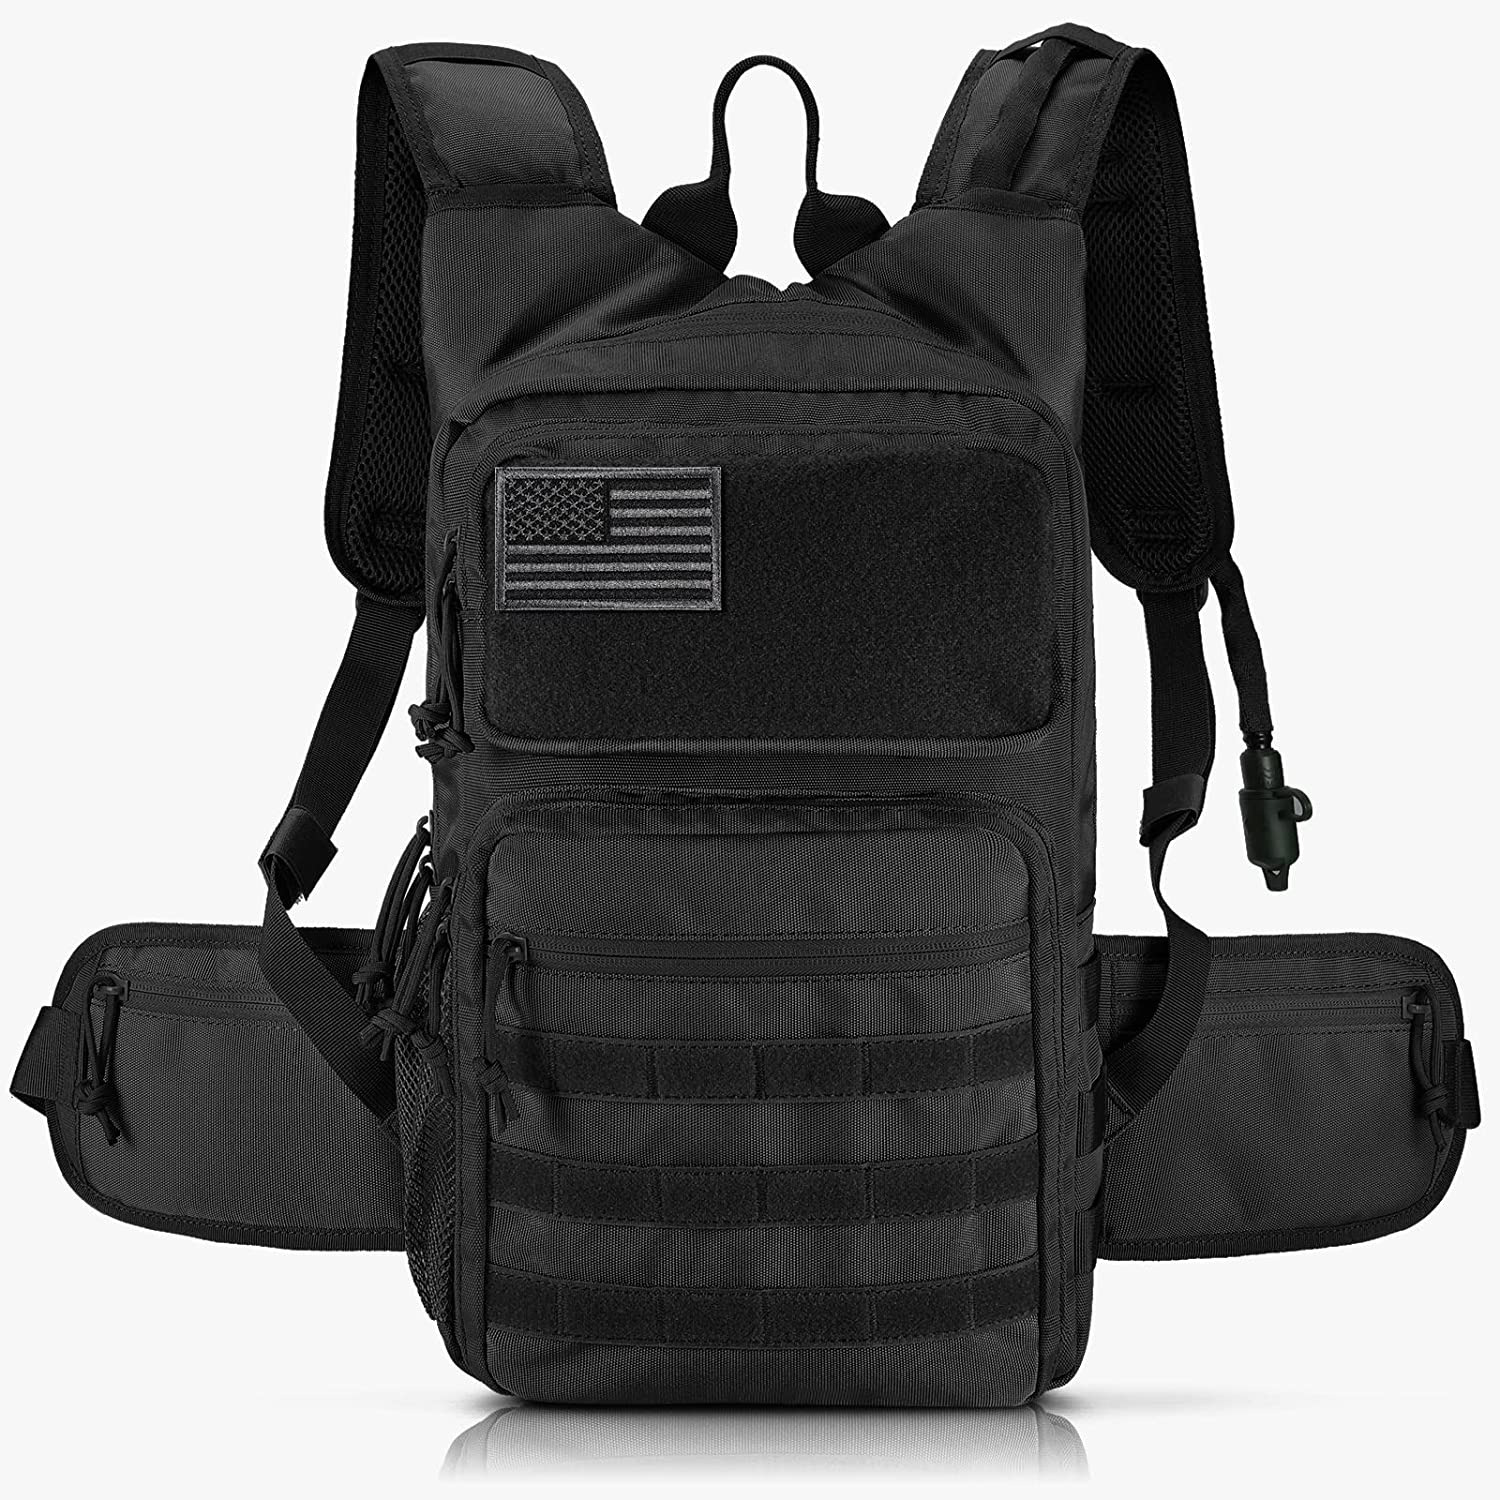 FRTKK Tactical Hydration Pack Backpack, Military Molle Water